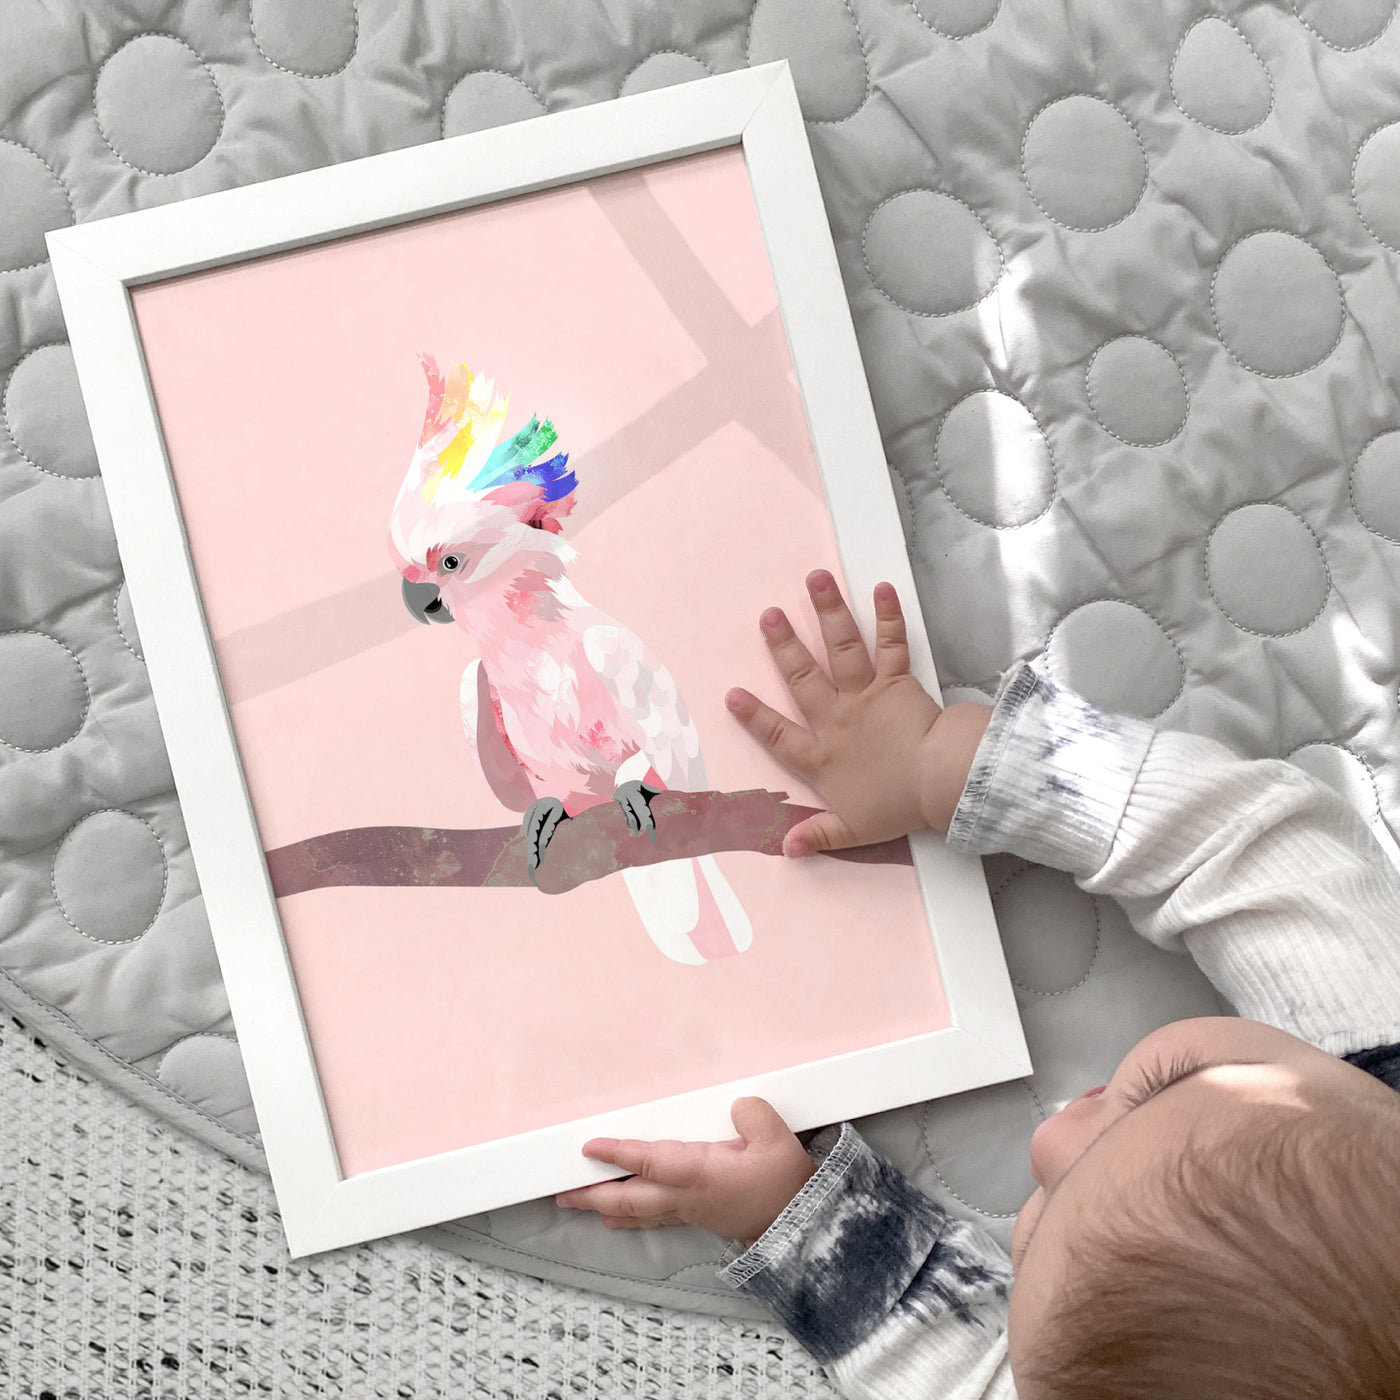 Galah Pop - Art Print, Poster, Stretched Canvas or Framed Wall Art Prints, shown framed in a room